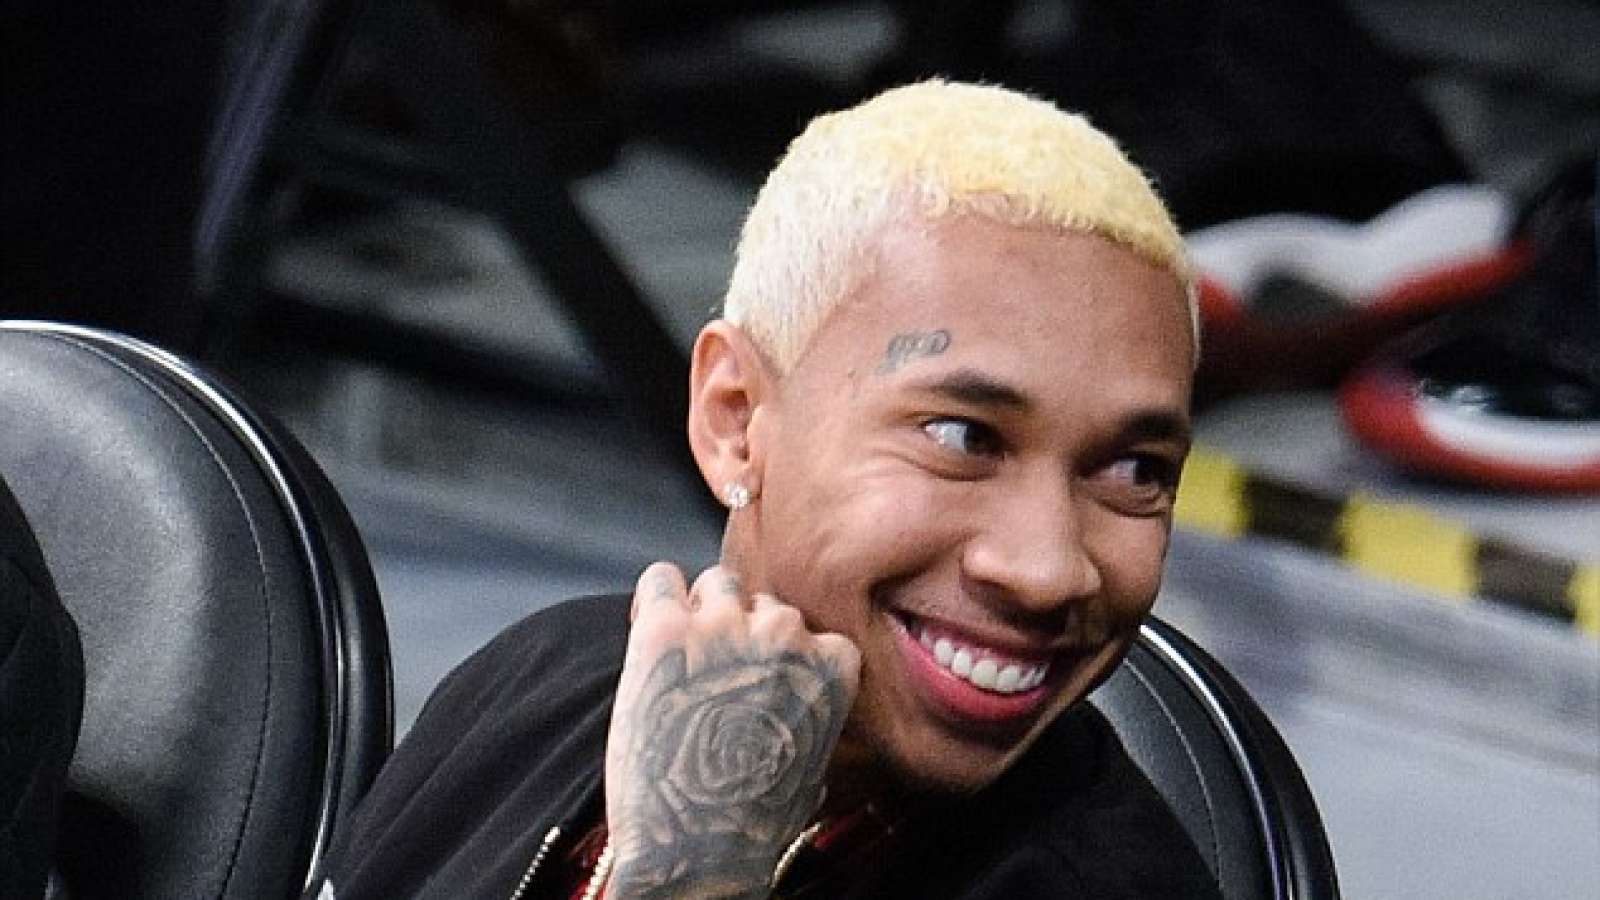 Tyga: Rapper hangs with pals amidst cheating sandal. Wetinhappen